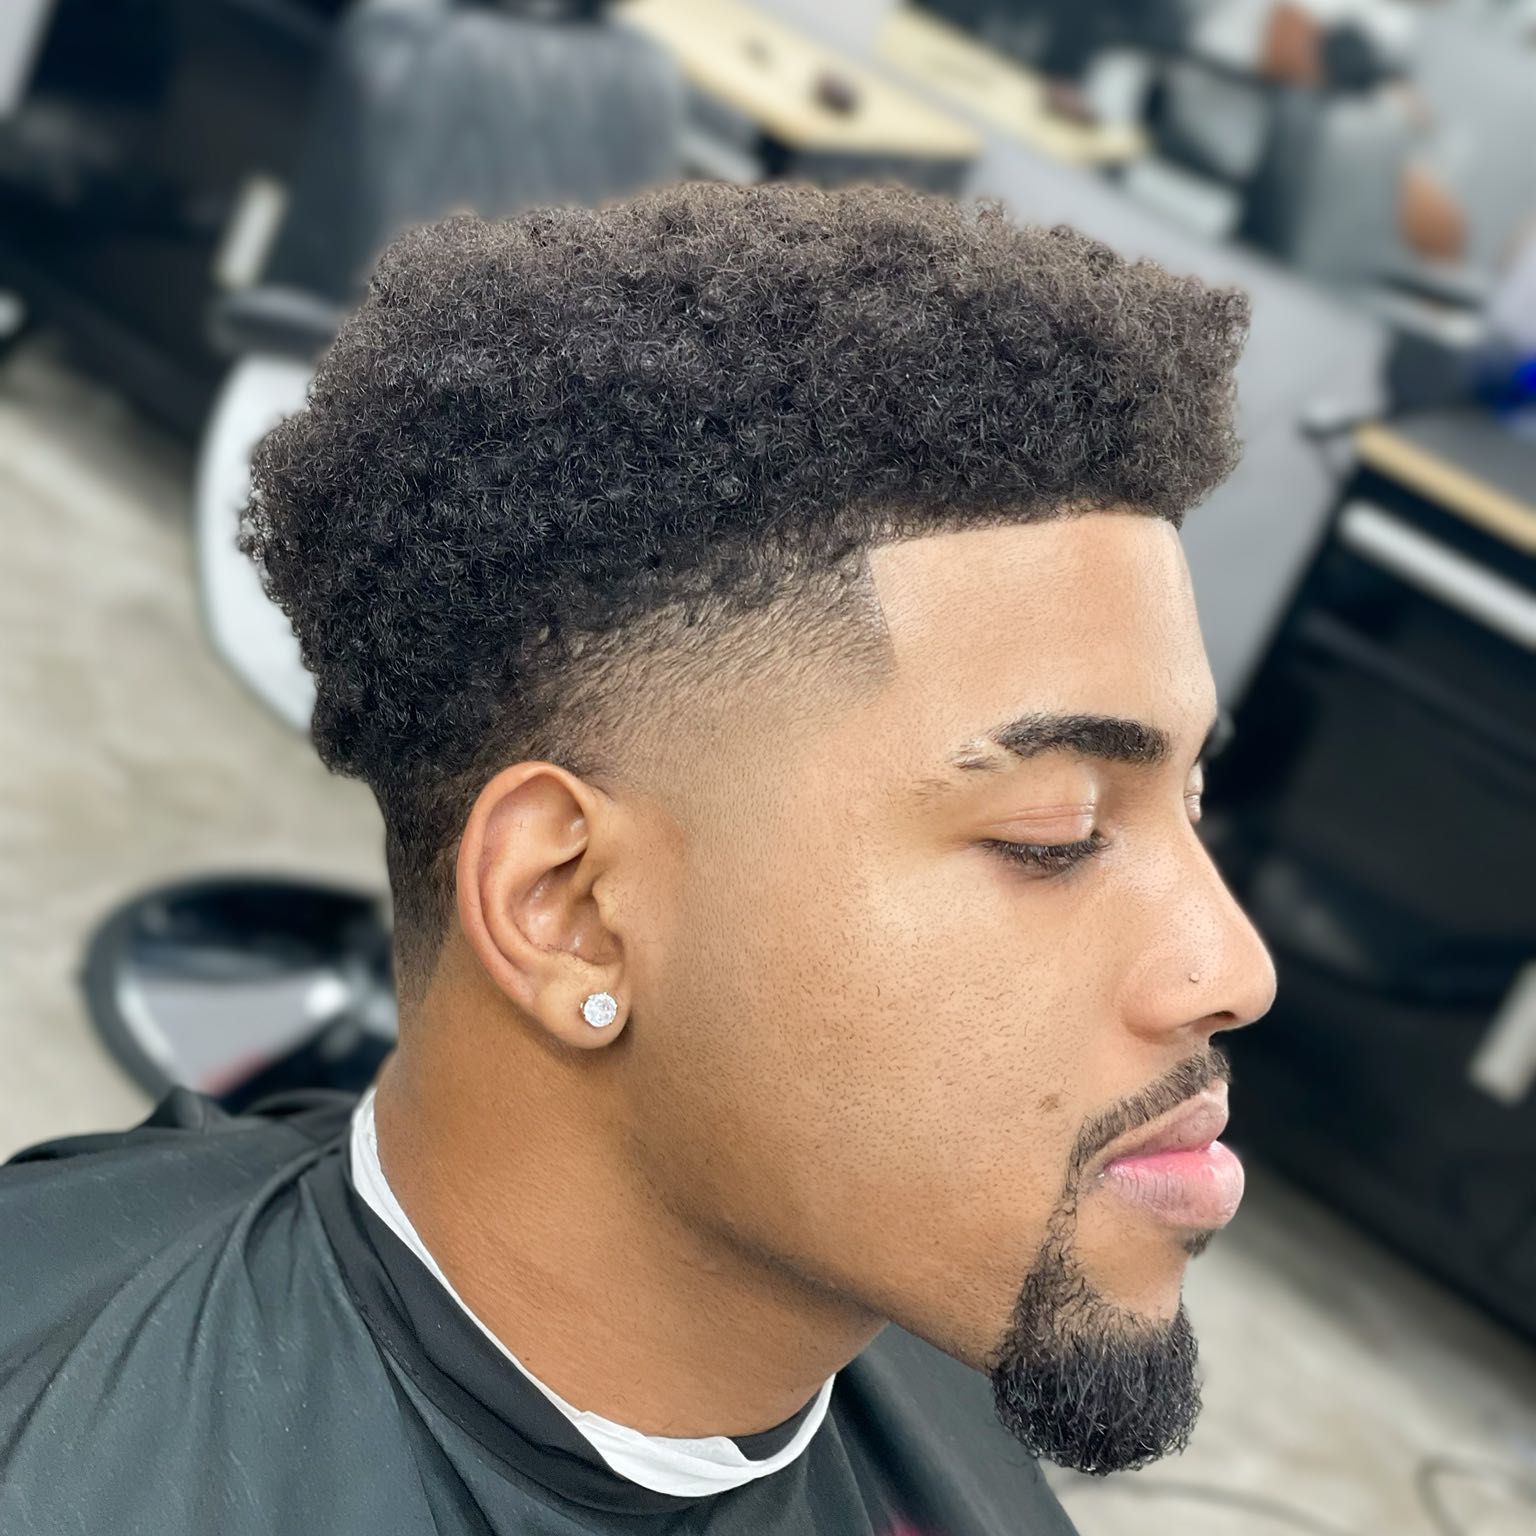 Haircut not skin fade (tapers, blowouts, all even) portfolio